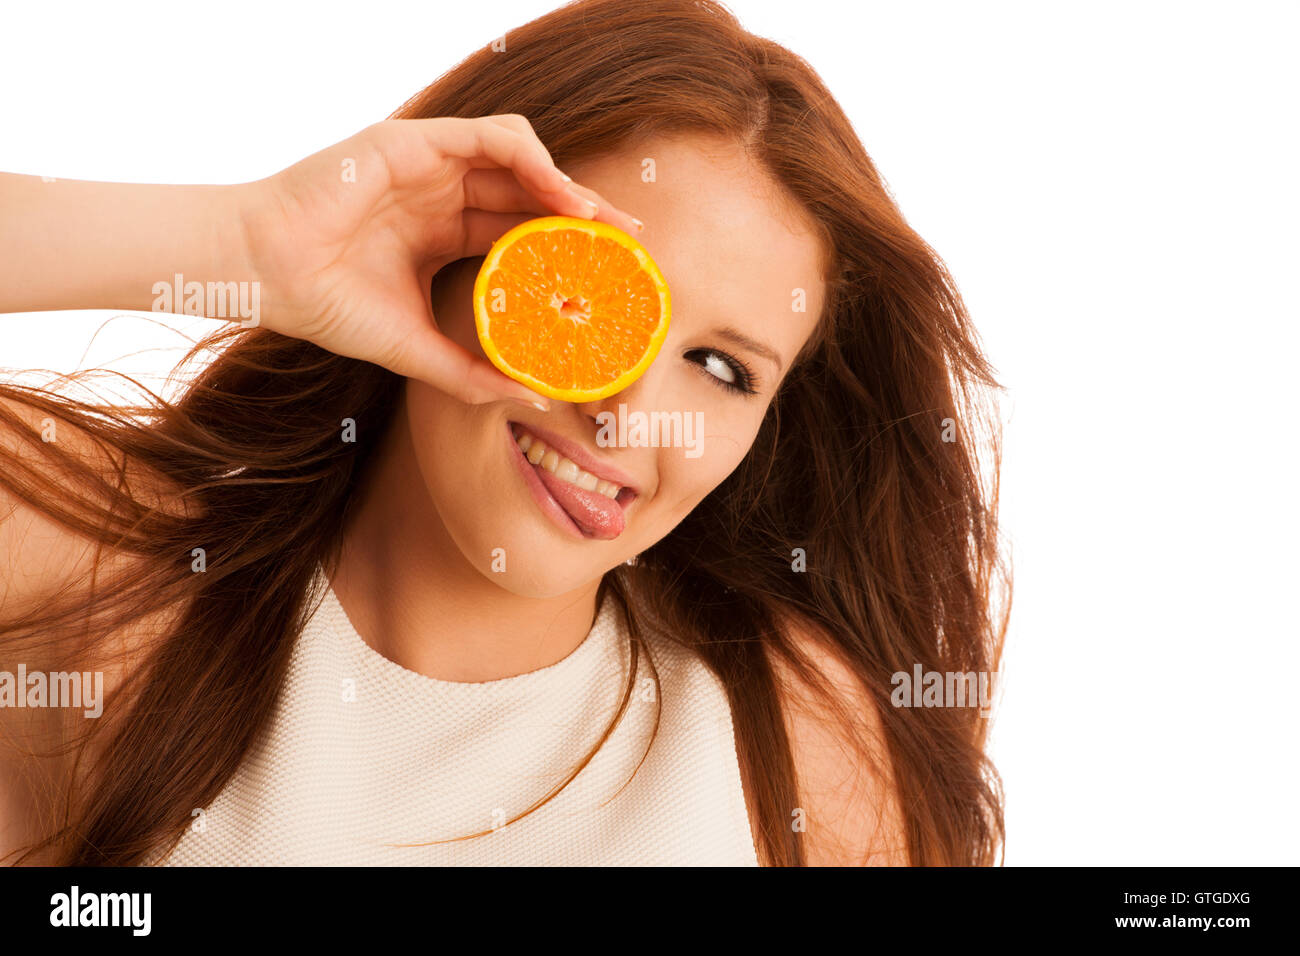 c-vitamine woman - girl with orange fruit in front of her face Stock Photo